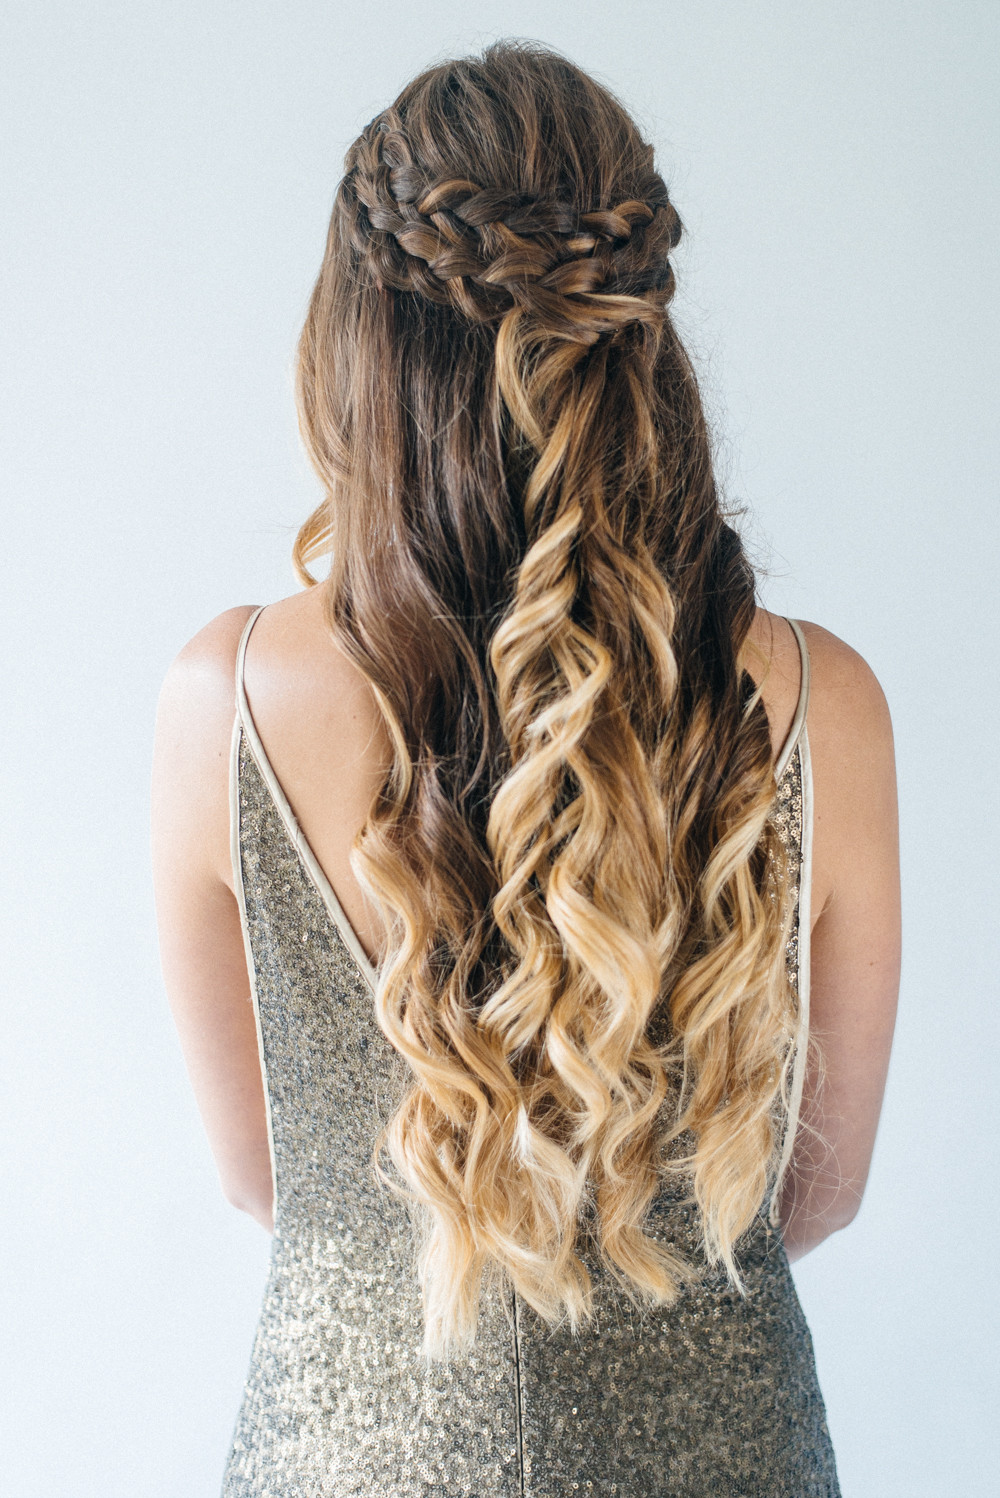 Up Wedding Hairstyles
 Inspiration For Half Up Half Down Wedding Hair With